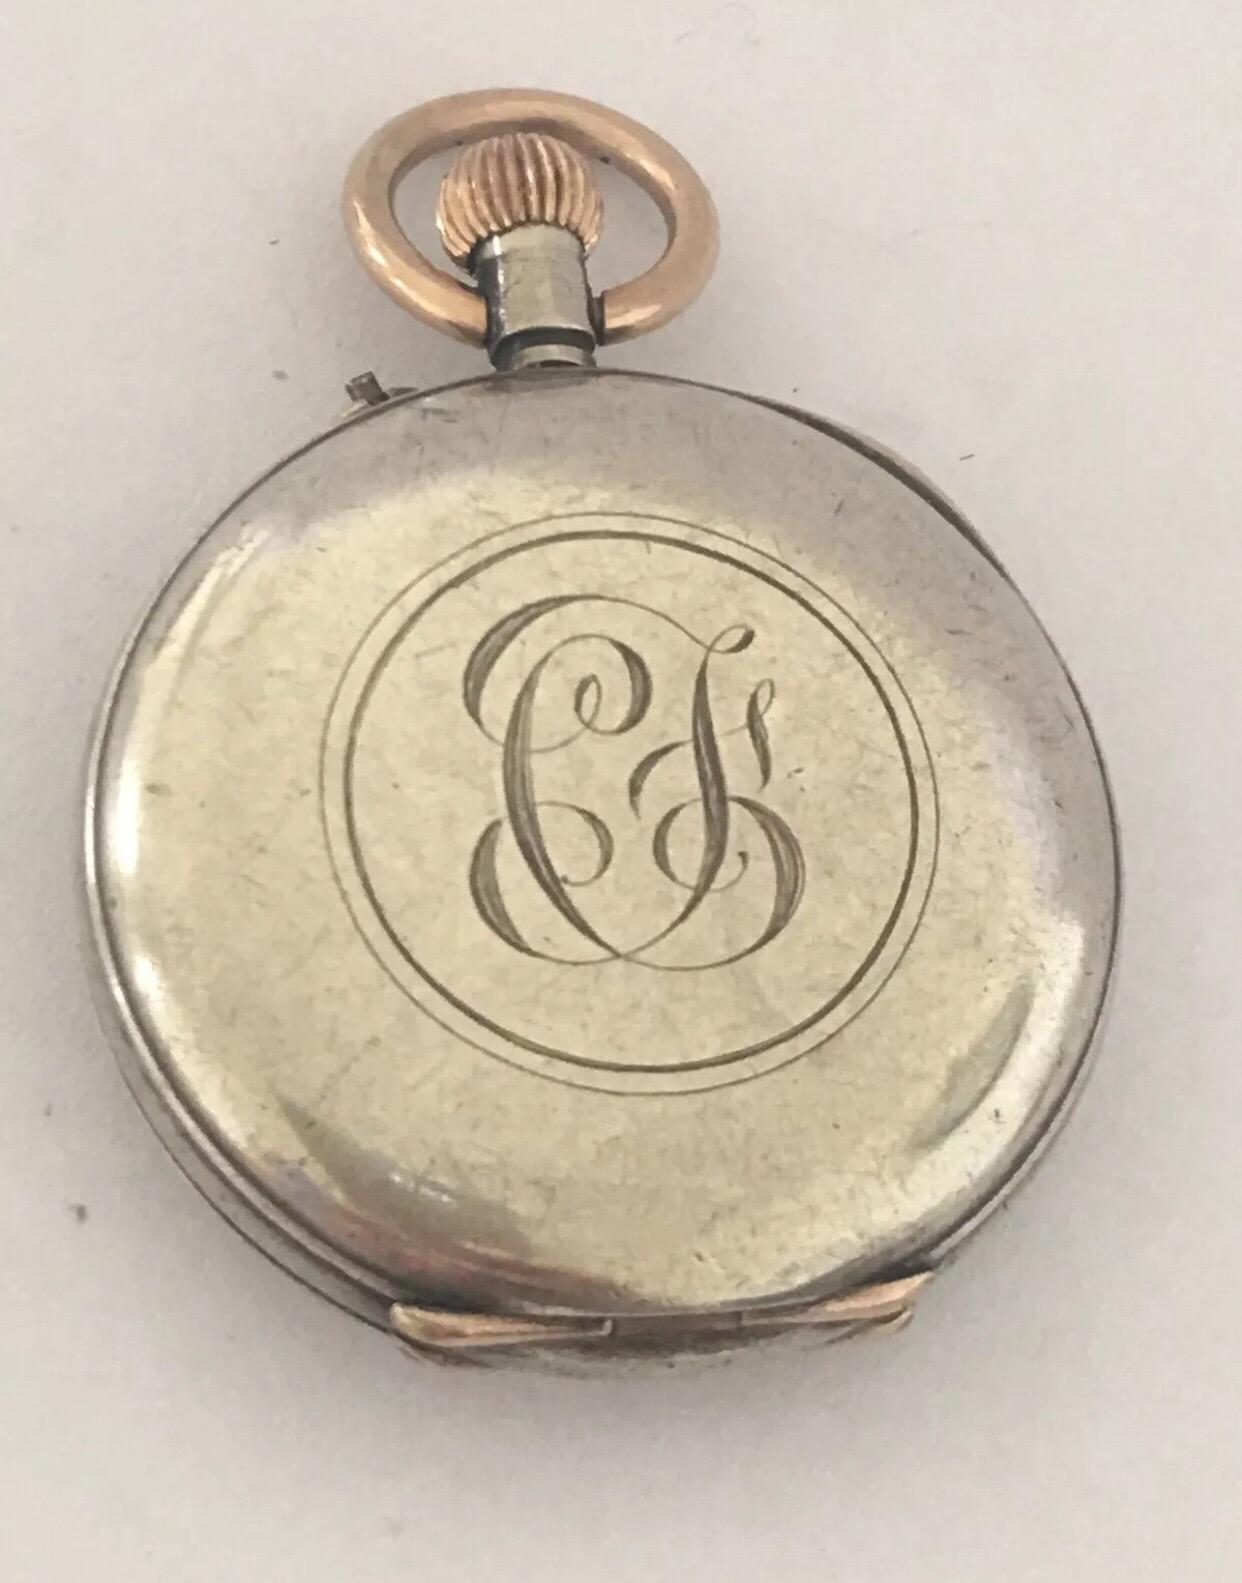 Antique Small Silver Half Hunter Pocket Watch.


This watch is working and ticking well. The glass on front case cover is missing. Visible sign of wear and tear on the watch case as shown on the photos